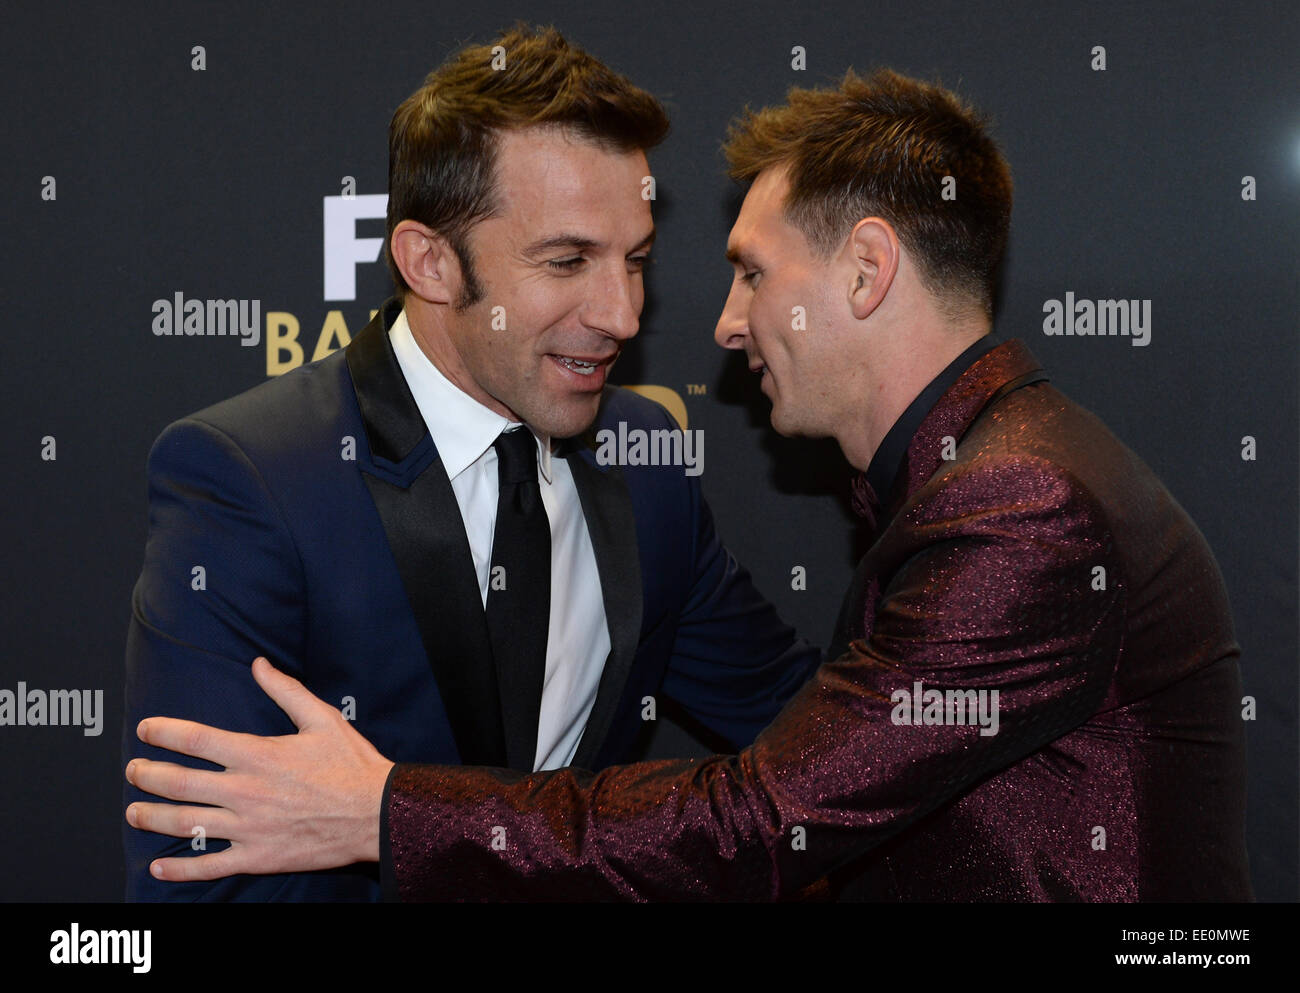 Zurich, Switzerland. 12th Jan, 2015. Former soccer player Alessandro Del Piero (L) of Italy and FC Barcelona's Lionel Messi, one of the nominees for the FIFA Ballon d'Or 2014 award, arrive at the FIFA Ballon d'Or Gala held at the Kongresshaus in Zurich, Switzerland, 12 January 2015. Photo: Patrick Seeger/dpa/Alamy Live News Stock Photo